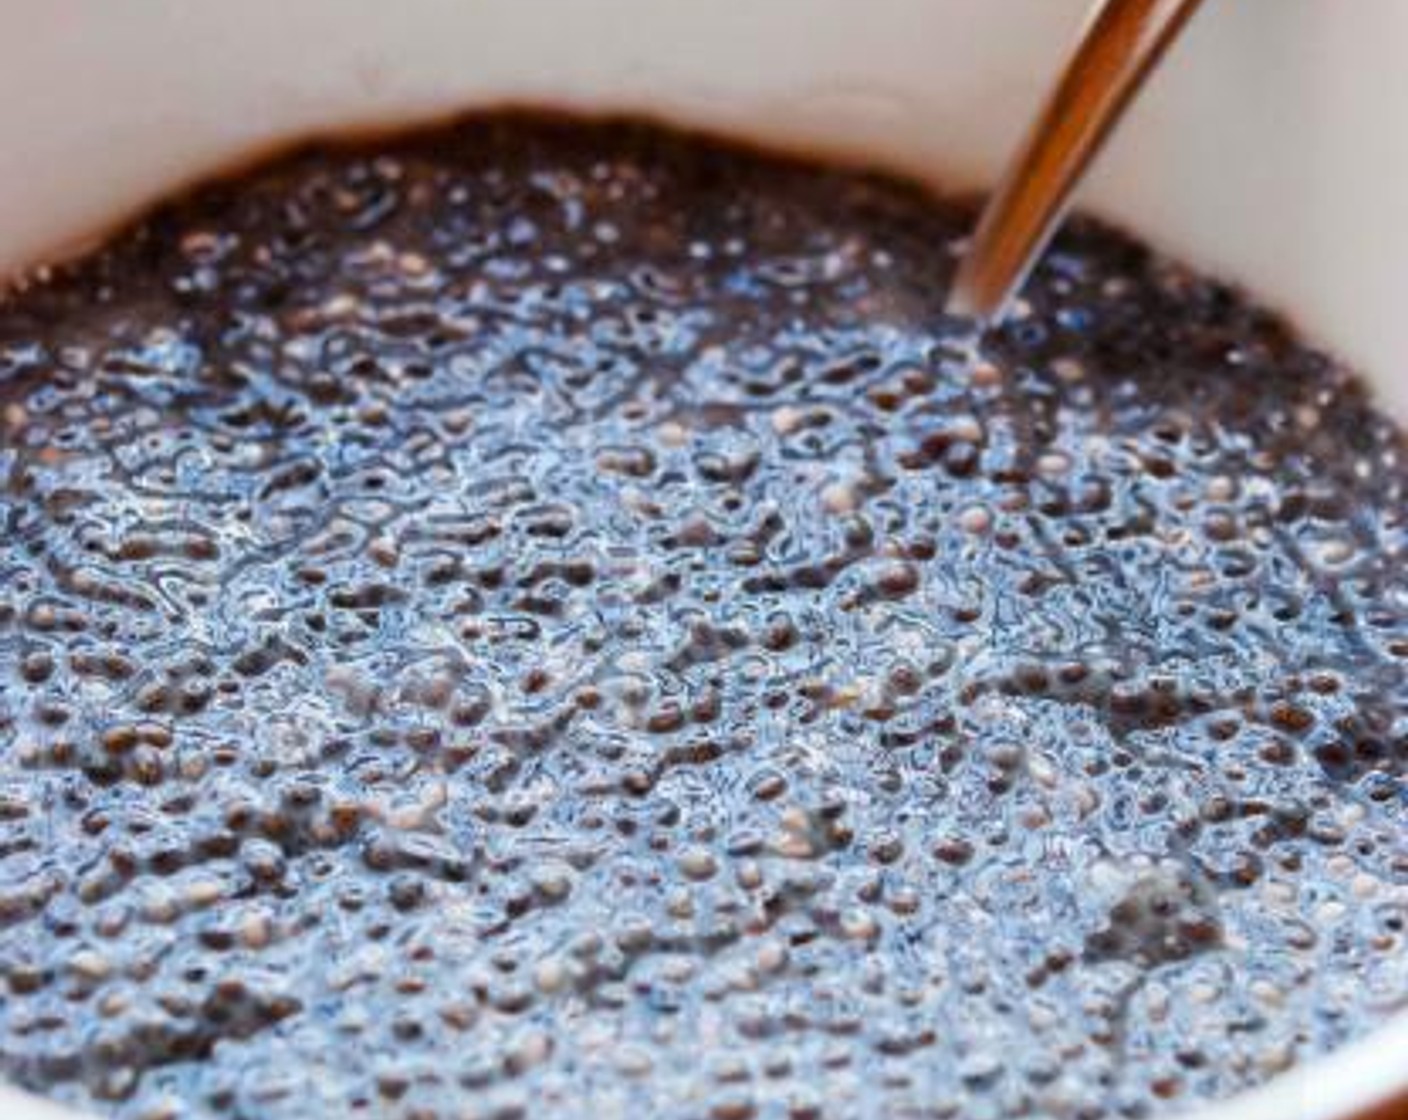 step 1 The night before, pour Rice Milk (1 cup) and Chia Seeds (1/4 cup) into a large bowl. Cover with plastic wrap and let it sit in your fridge overnight.